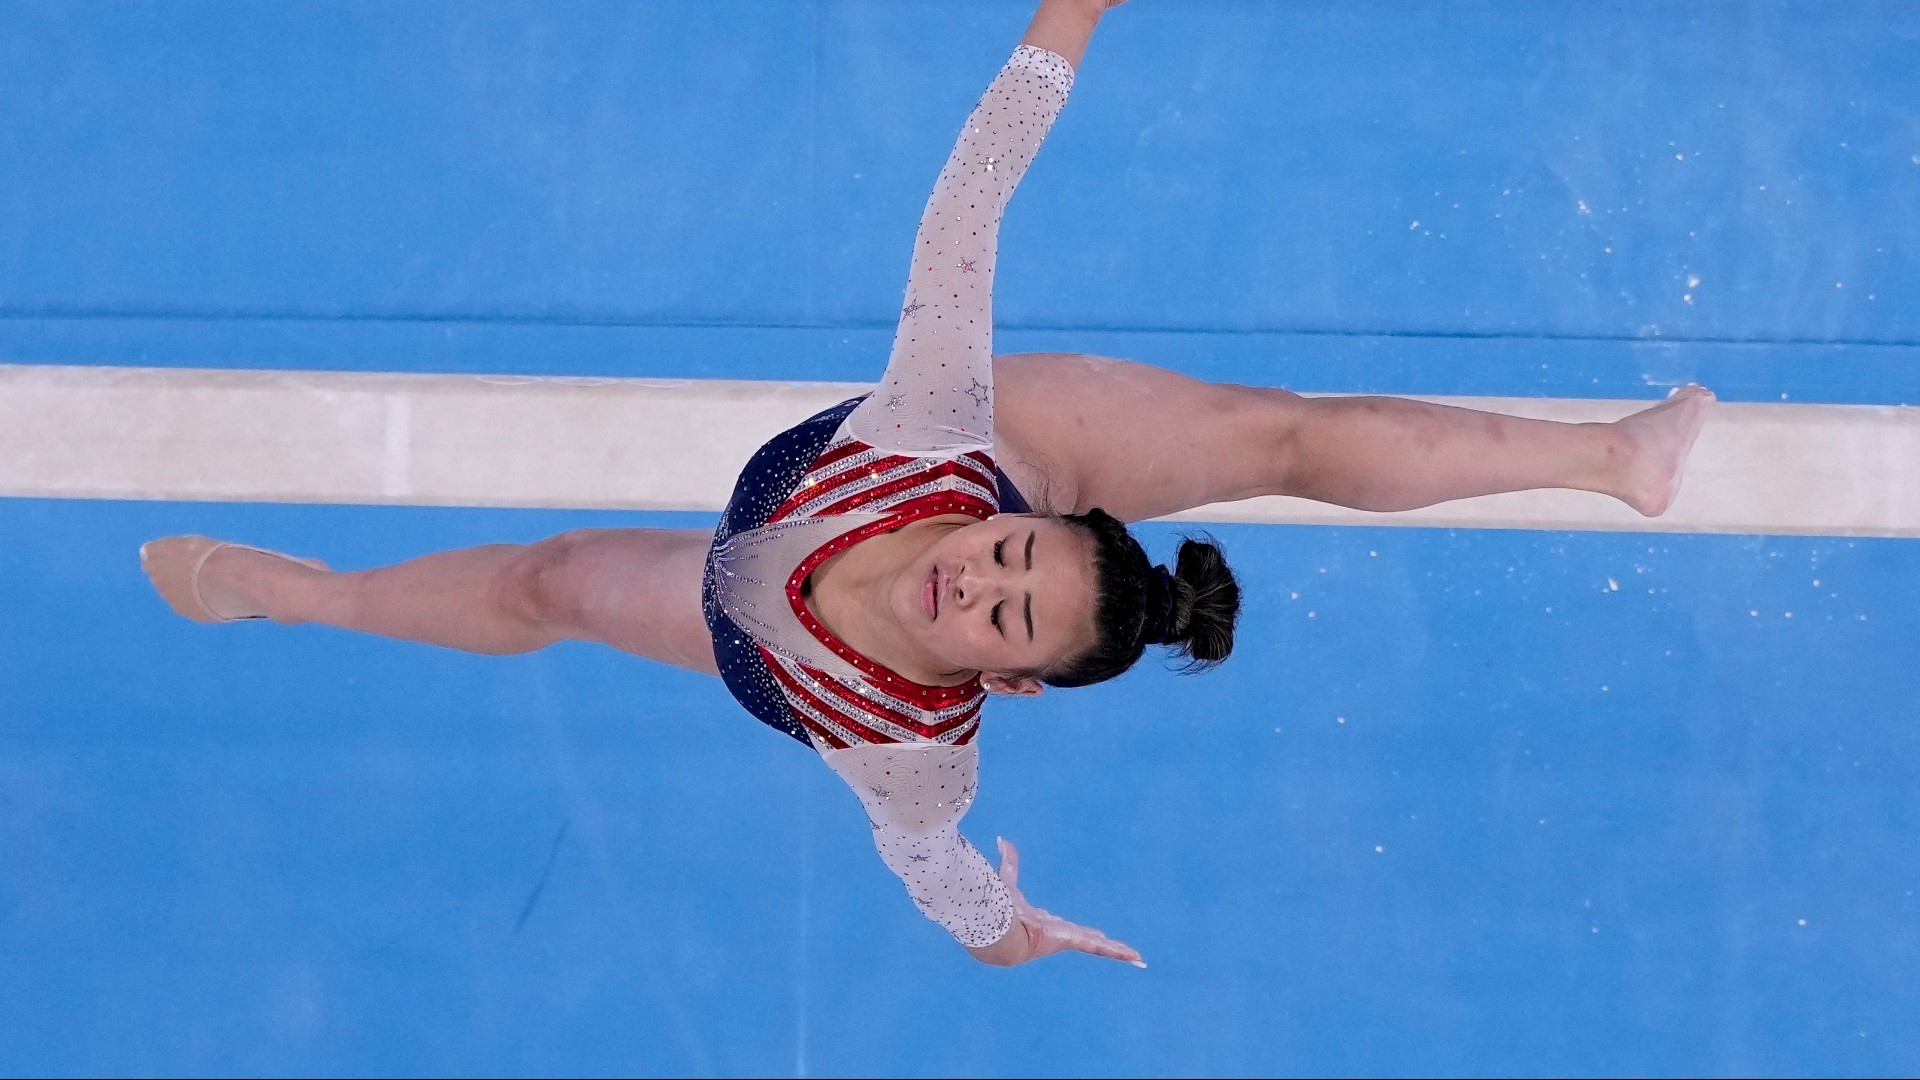 Social media is bursting with posts expressing pride in St. Paul's home-grown gymnast following her gold medal win in Tokyo.